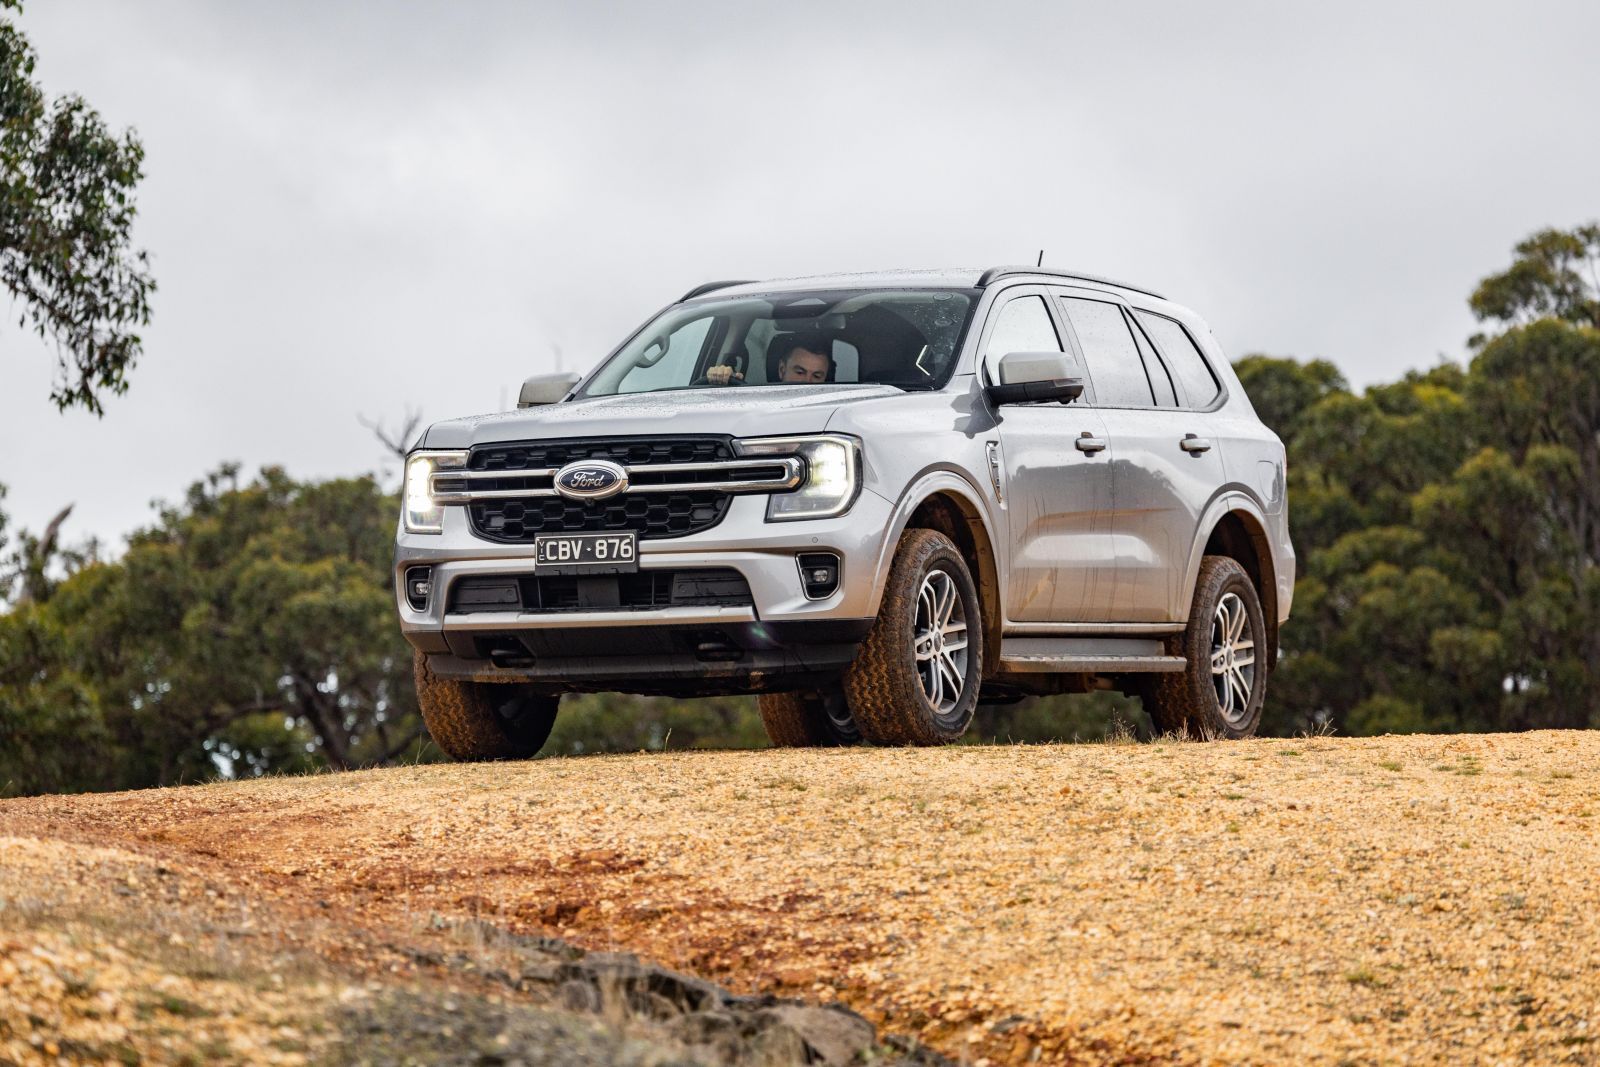 The SUVs with the lowest and highest ground clearance CarExpert